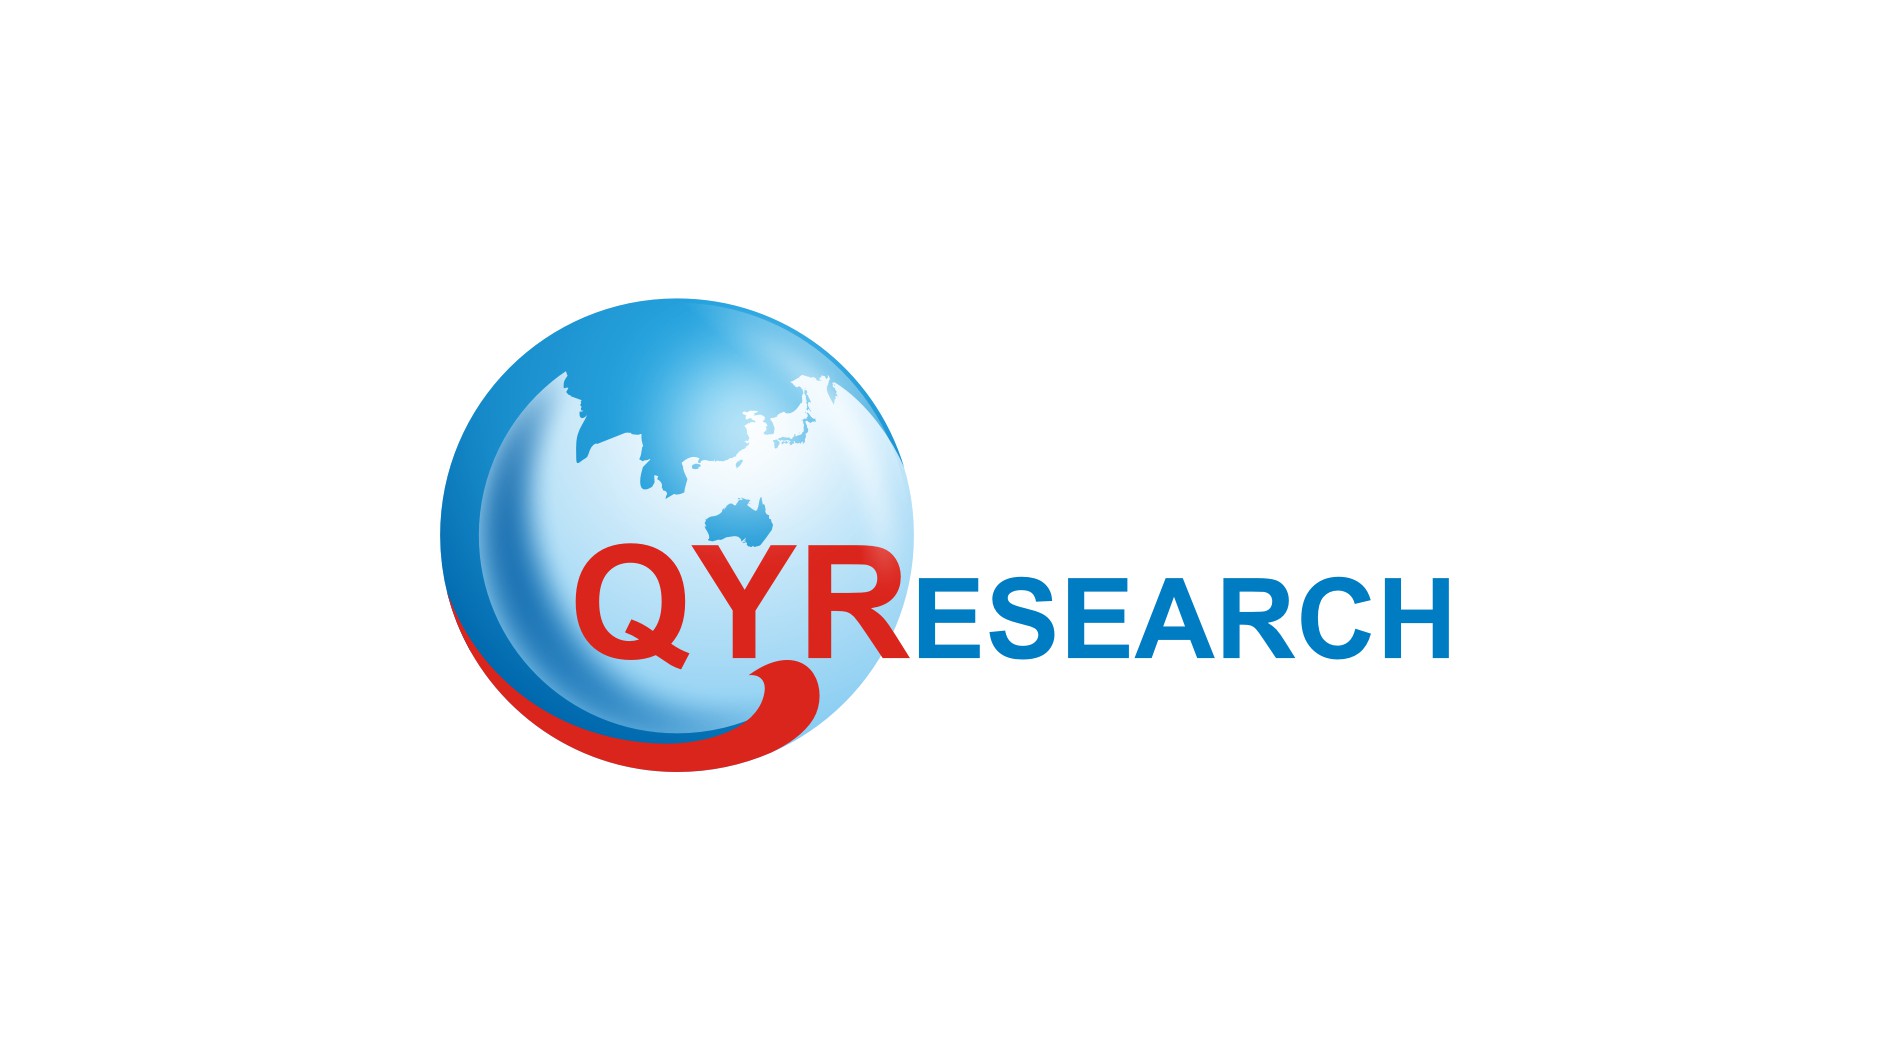 Glazed Curtain Wall Market Forecast by 2025: QY Research